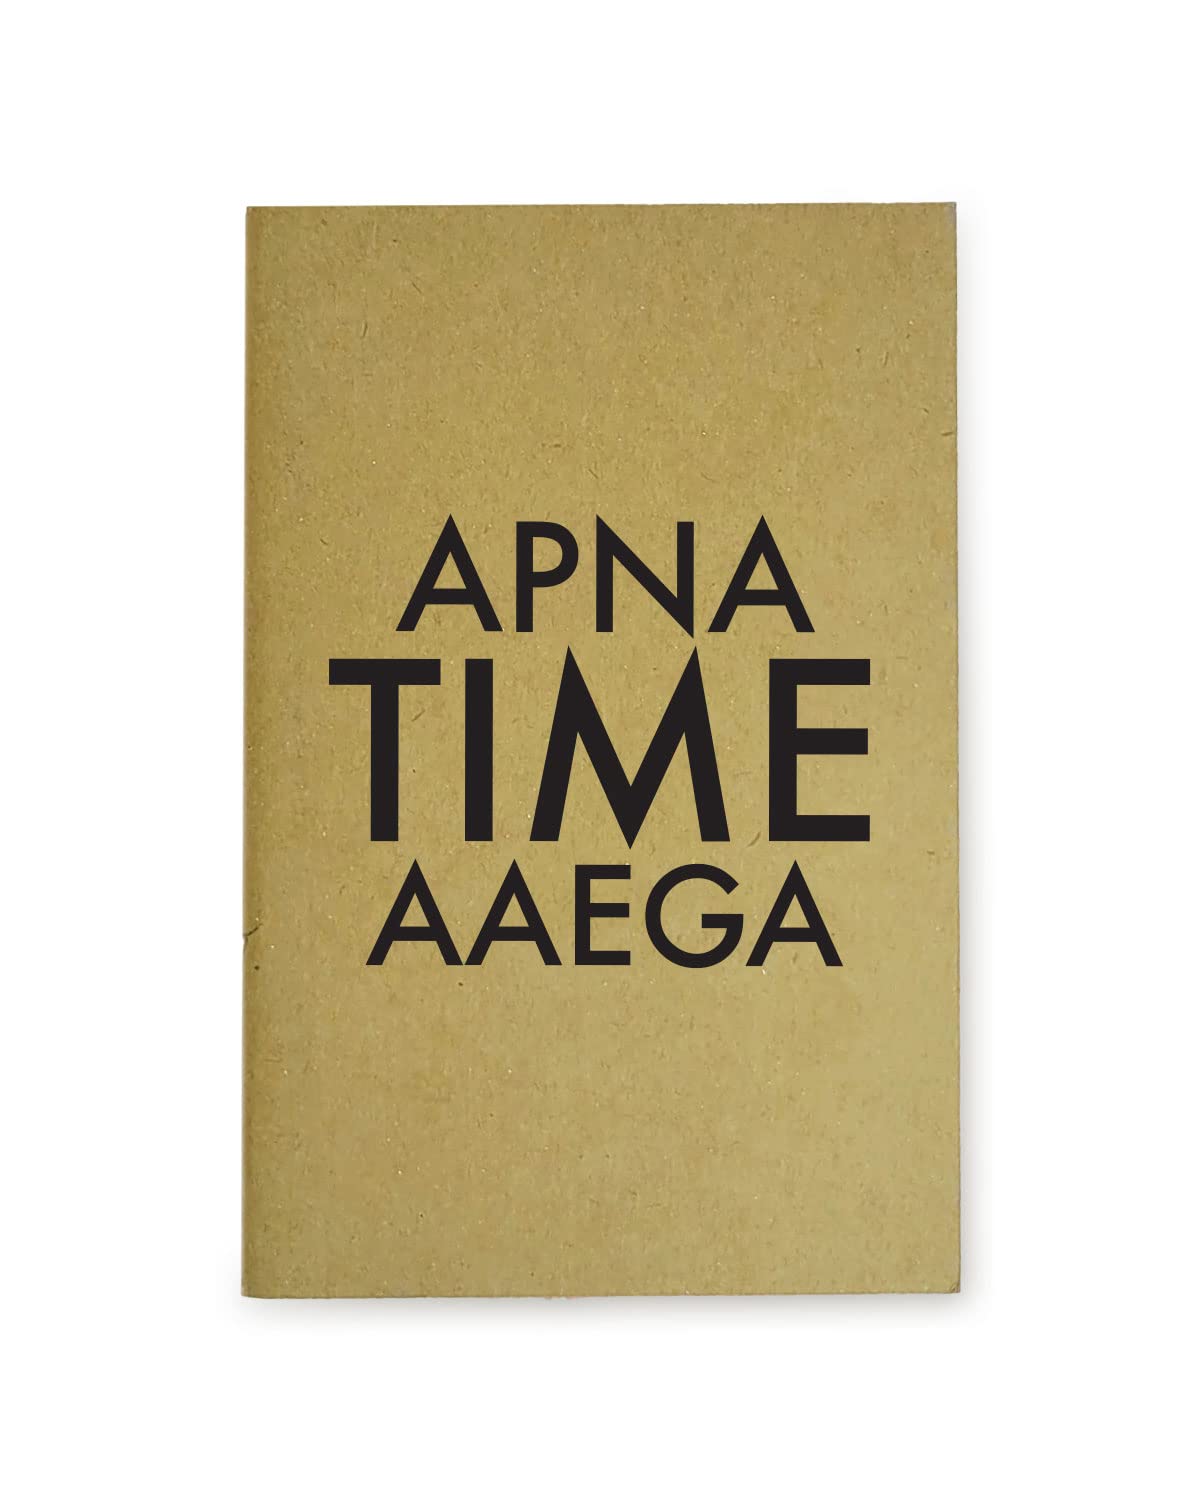 Apna Time Aaega - Brown A5 Doodle Notebook - Kraft Cover Notebook - A5 - 300 GSM Kraft Cover - Handmade - Unruled - 80 Pages - Natural Shade Pages 120 GSM - Funny Quotes & Quirky, Funky designs